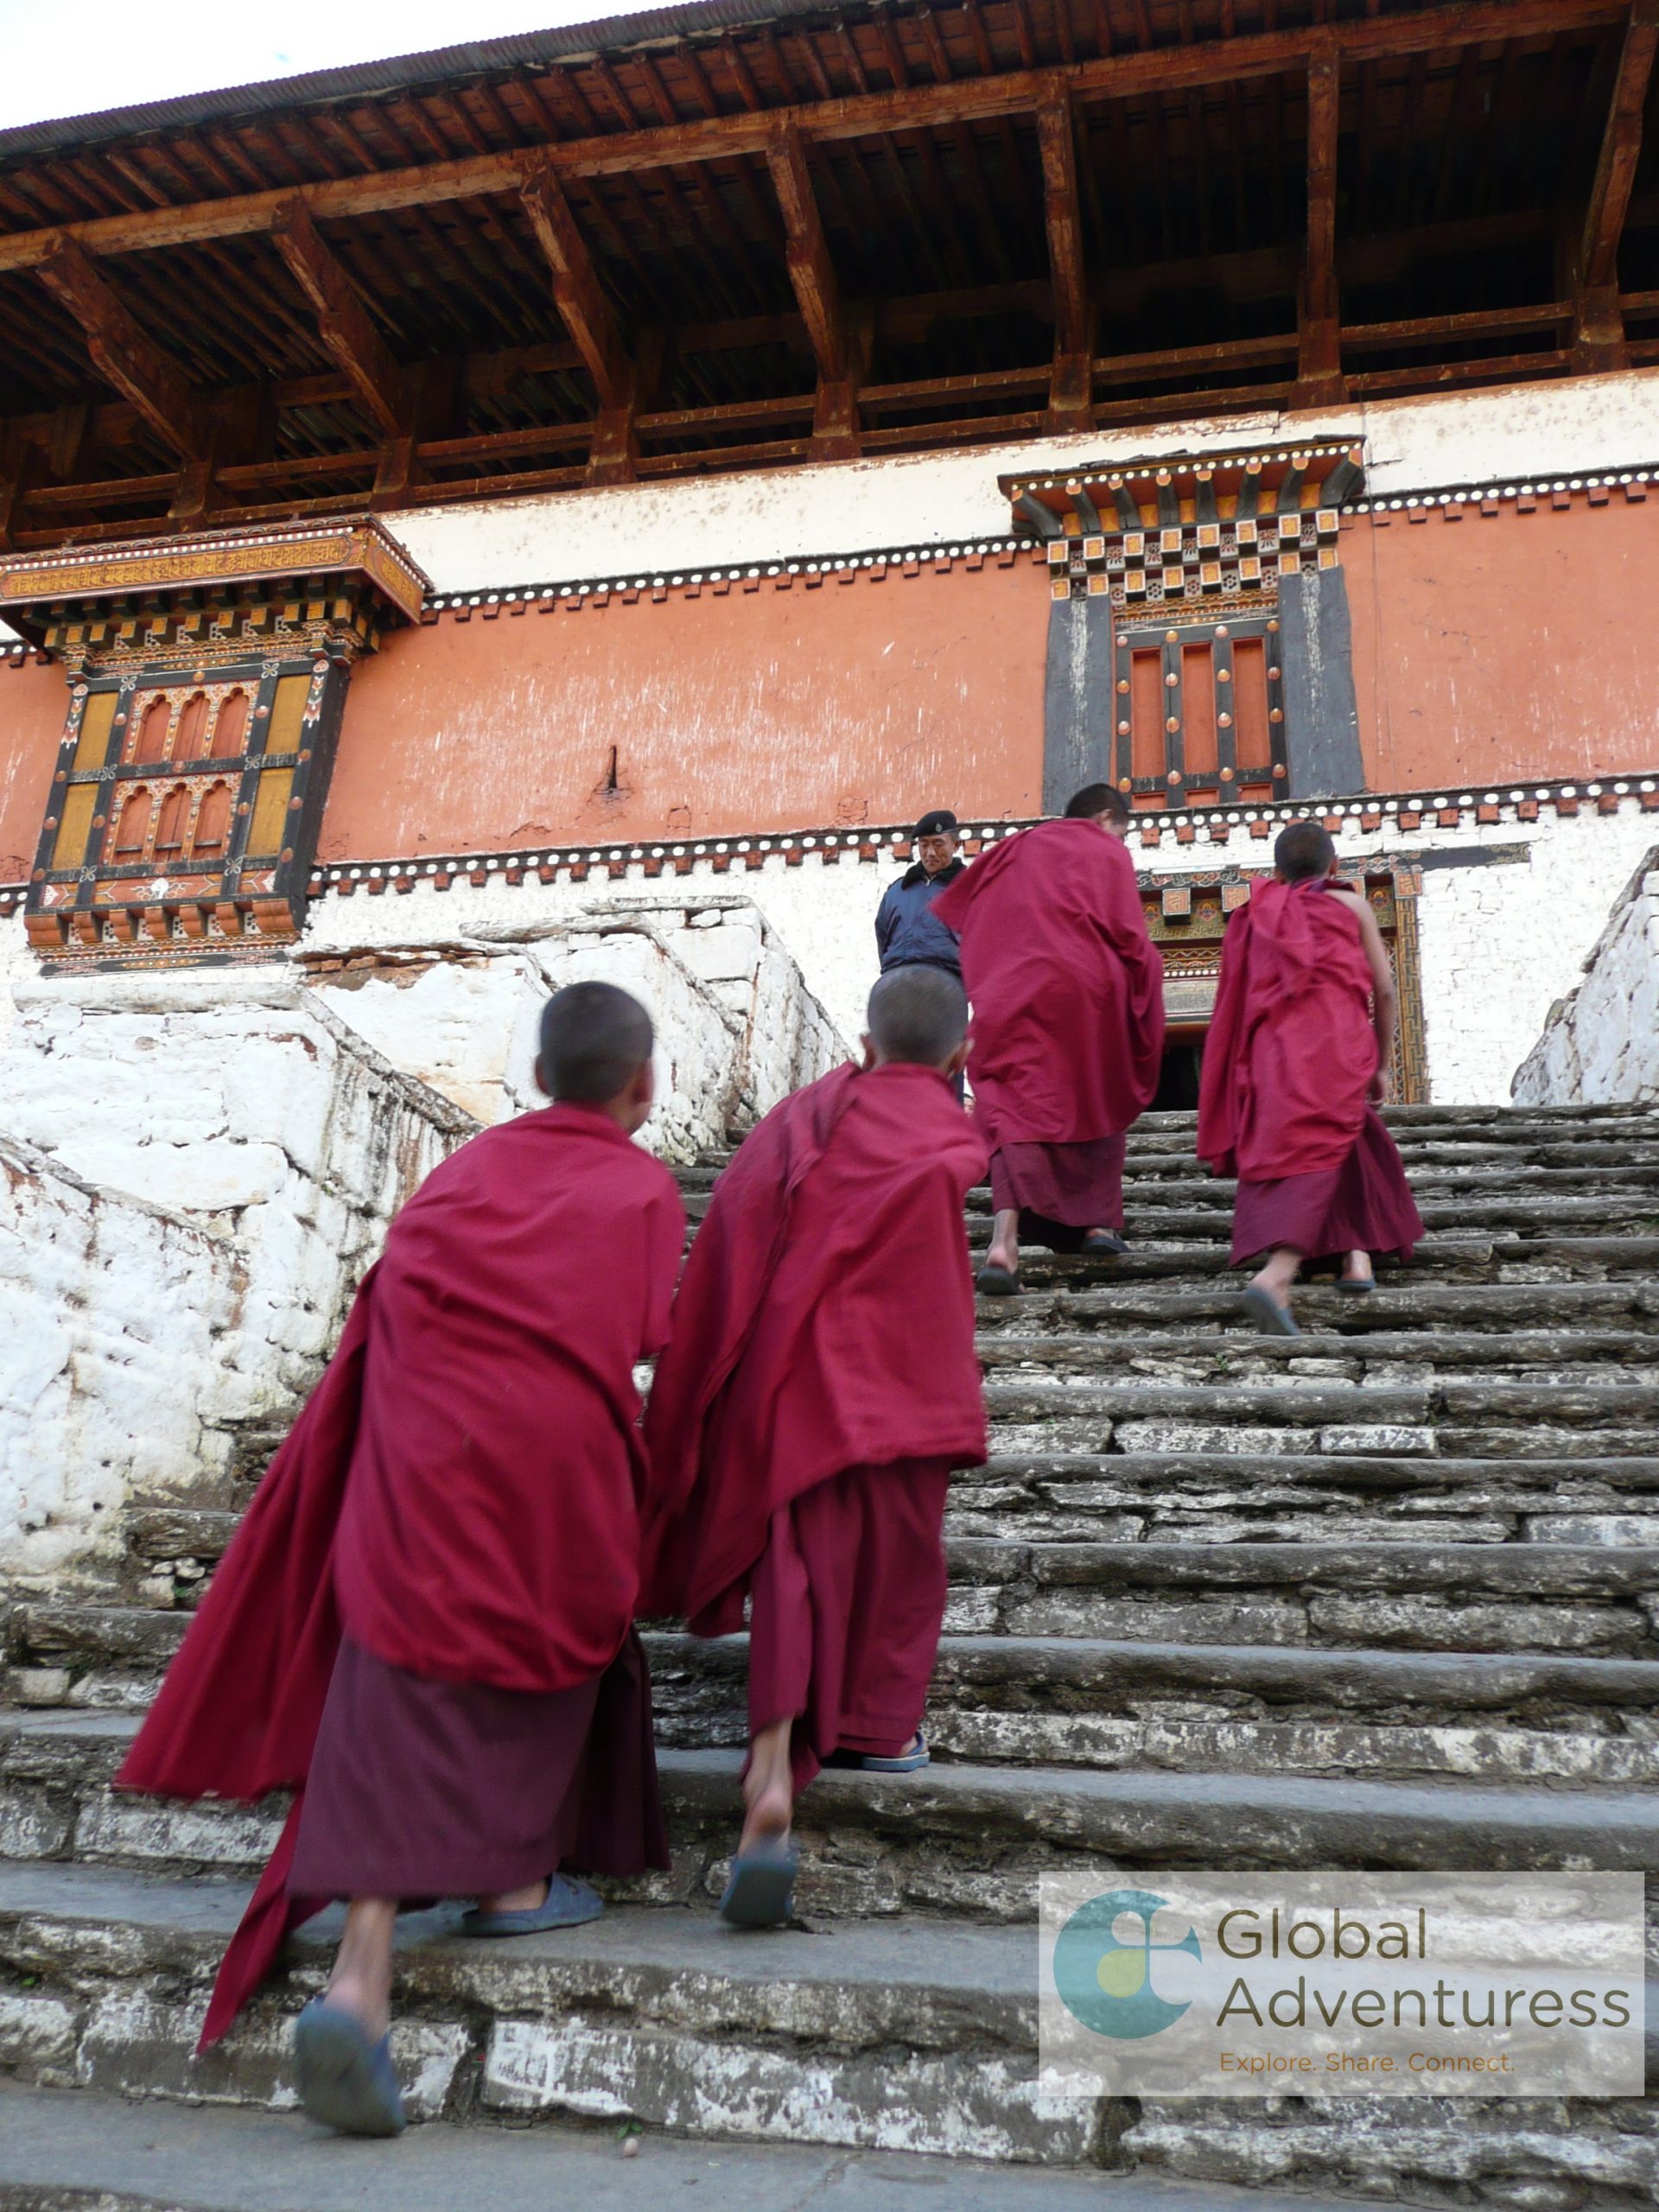 Our Journey to the Kingdom of Bhutan